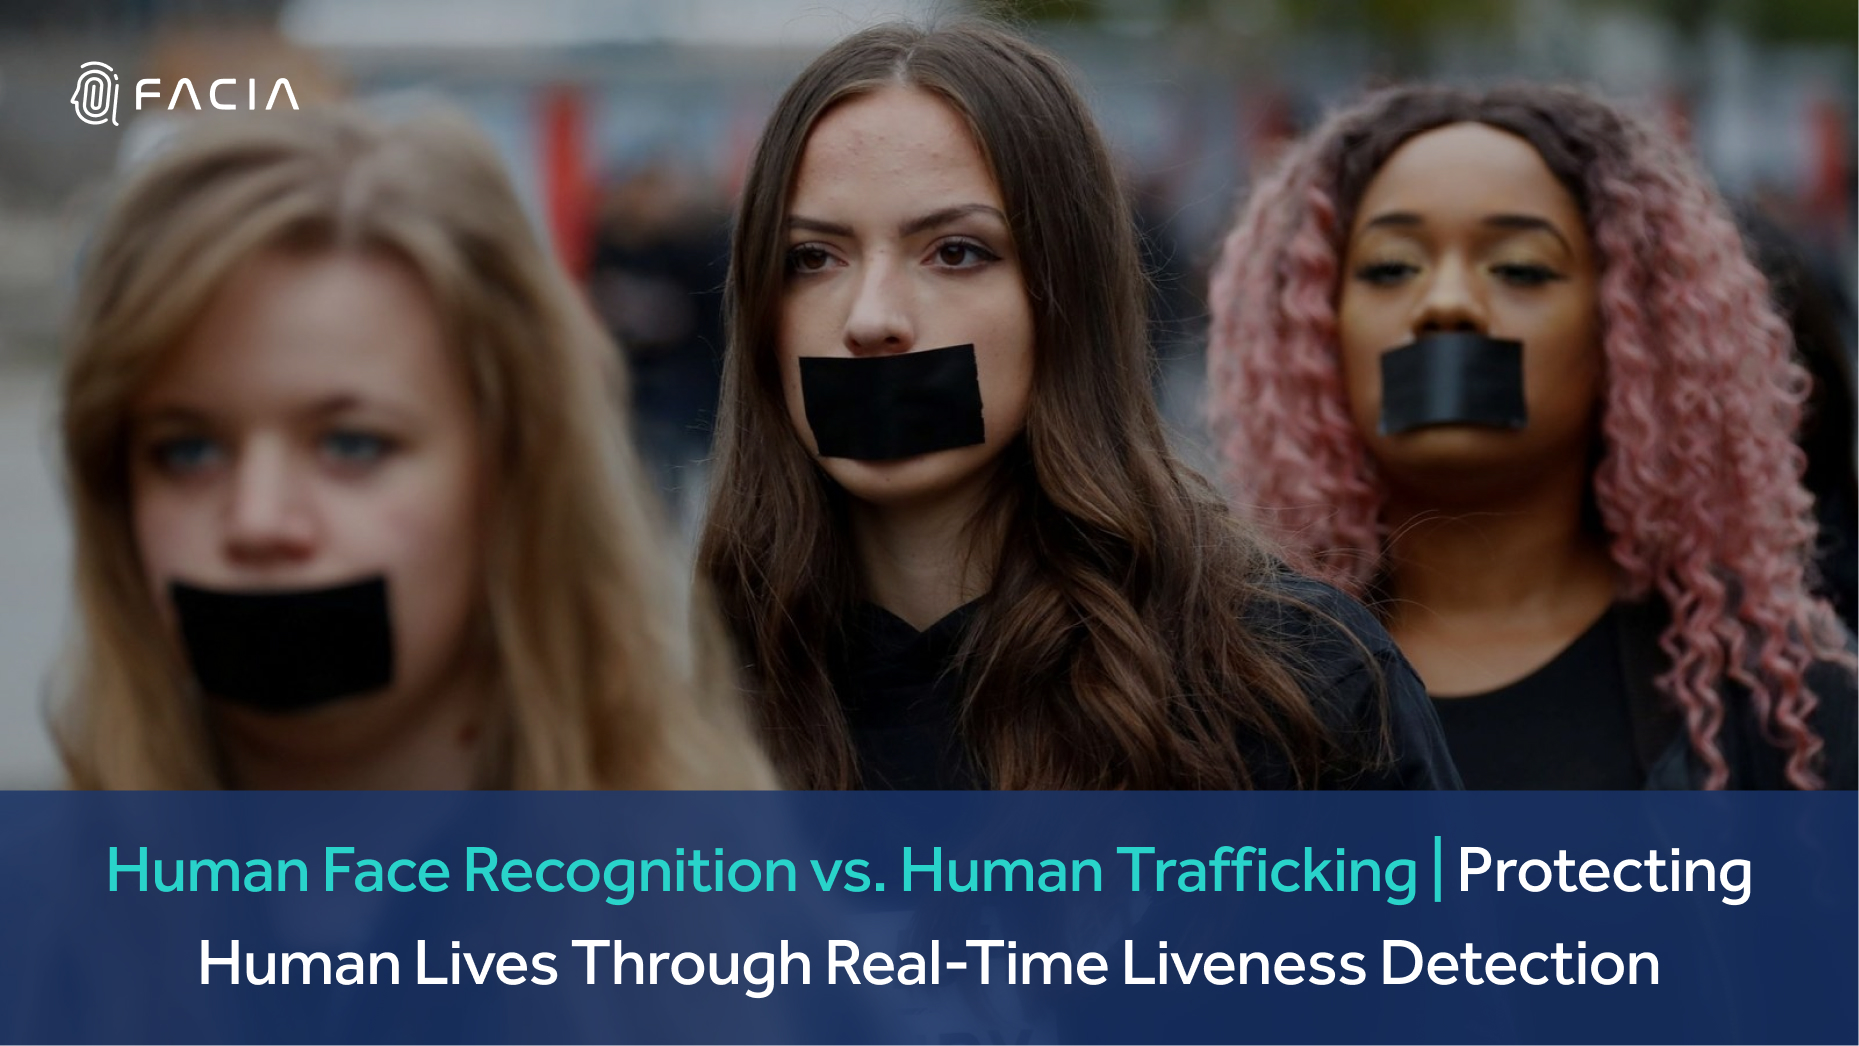 Human Face Recognition vs. Human Trafficking Protecting Human Lives Through Real-Time Liveness Detection